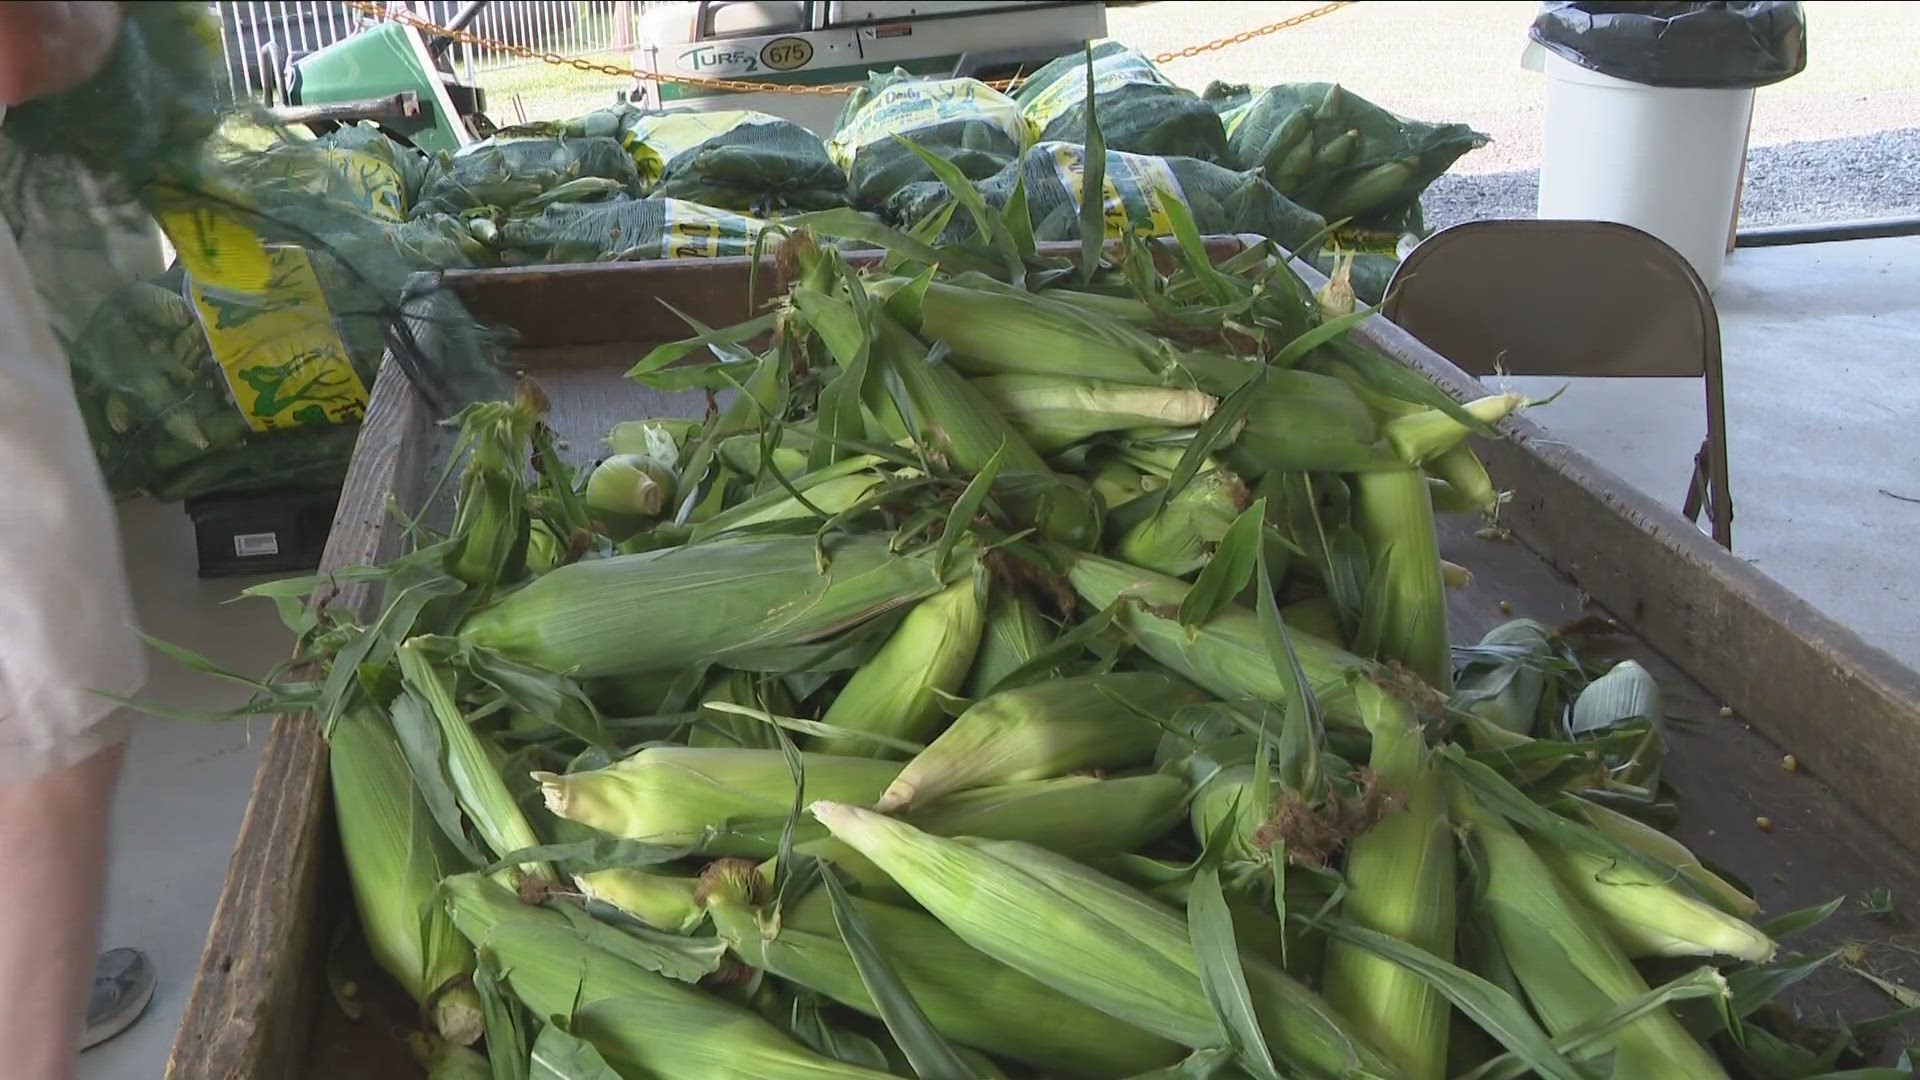 The Eden Corn Festival makes its return for its 59th year.